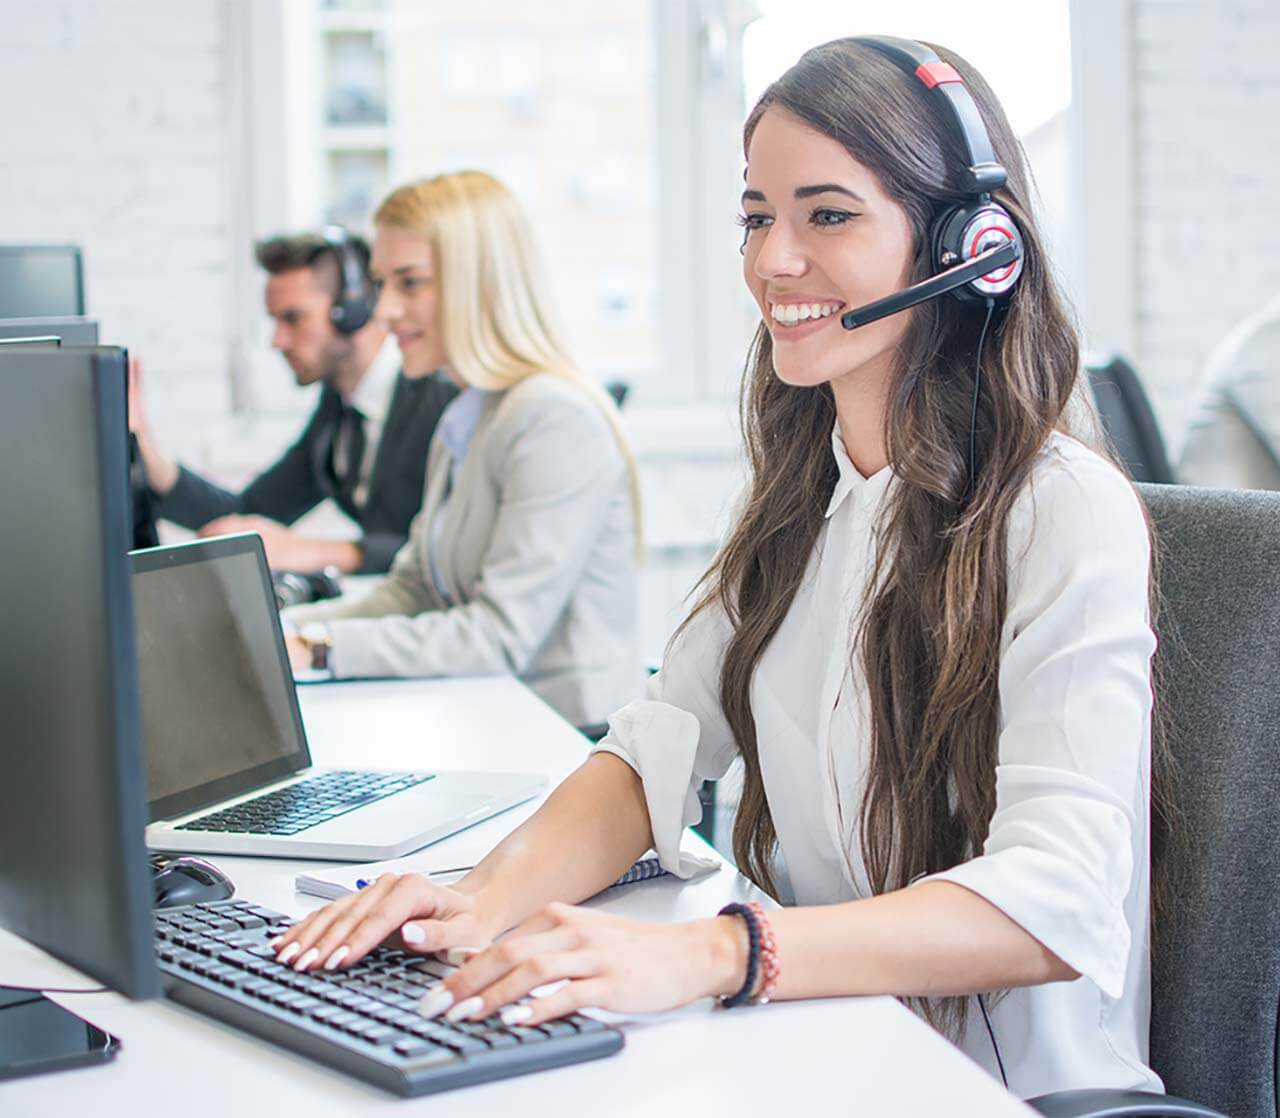 Woman sitting at computer with headset on answering support calls